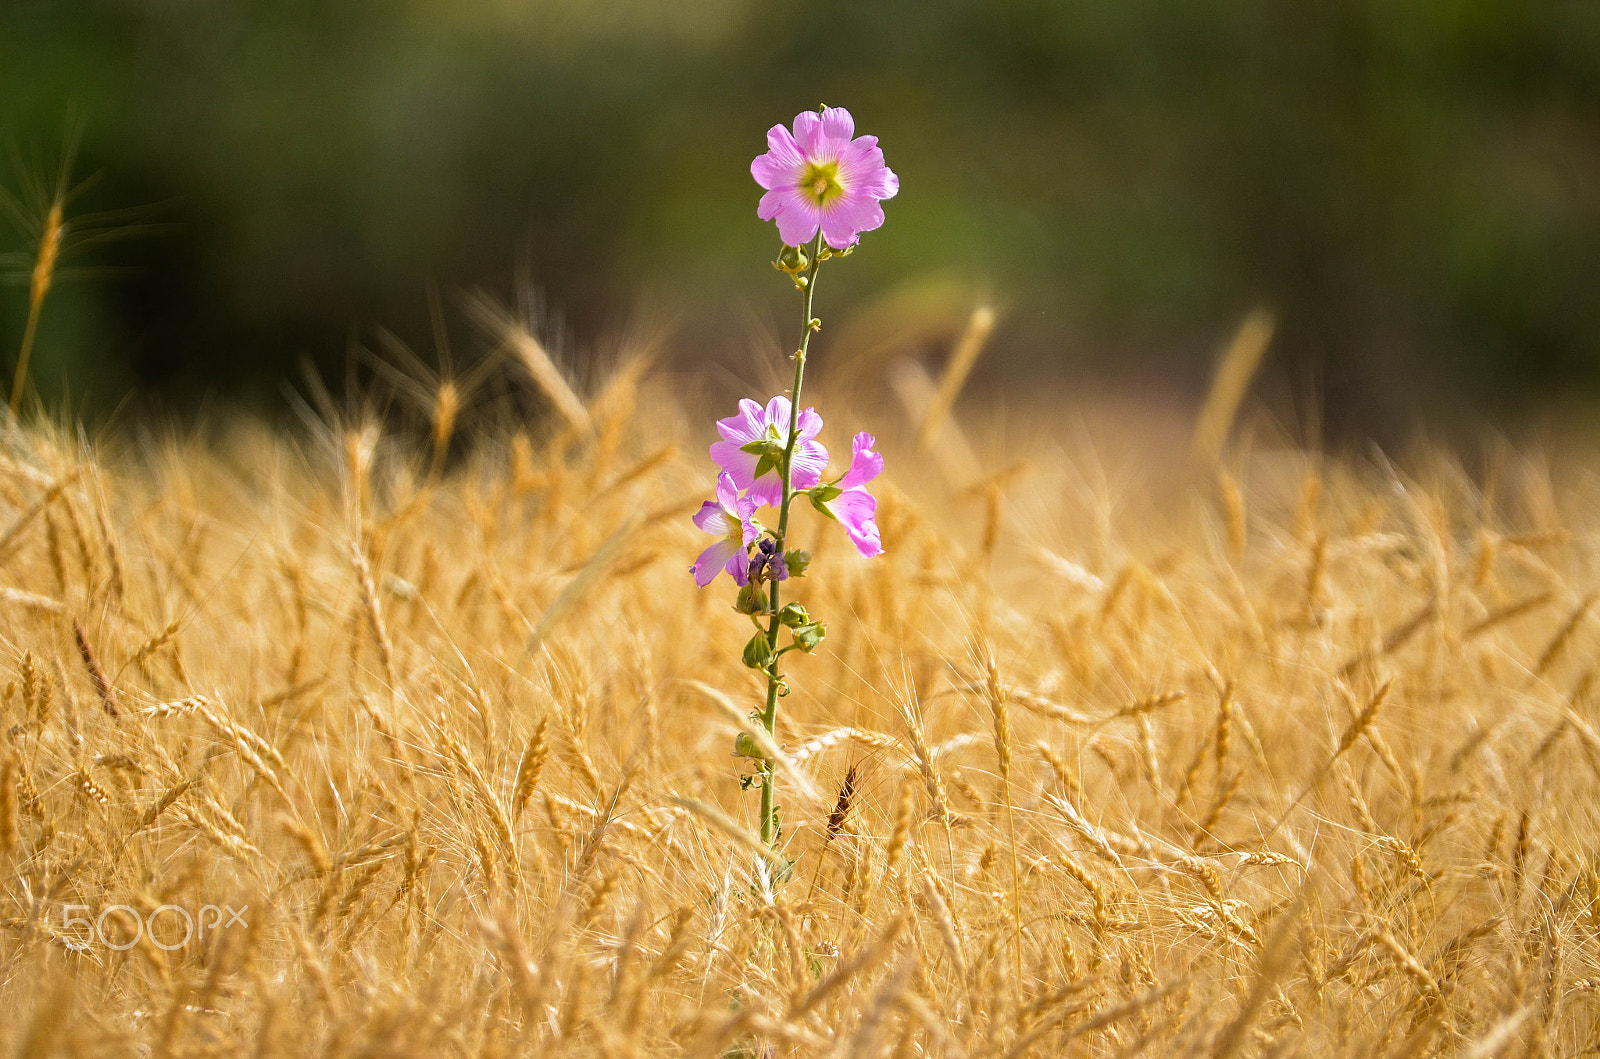 Nikon D5100 + Sigma 150-600mm F5-6.3 DG OS HSM | S sample photo. Flowers among the wheat fields photography